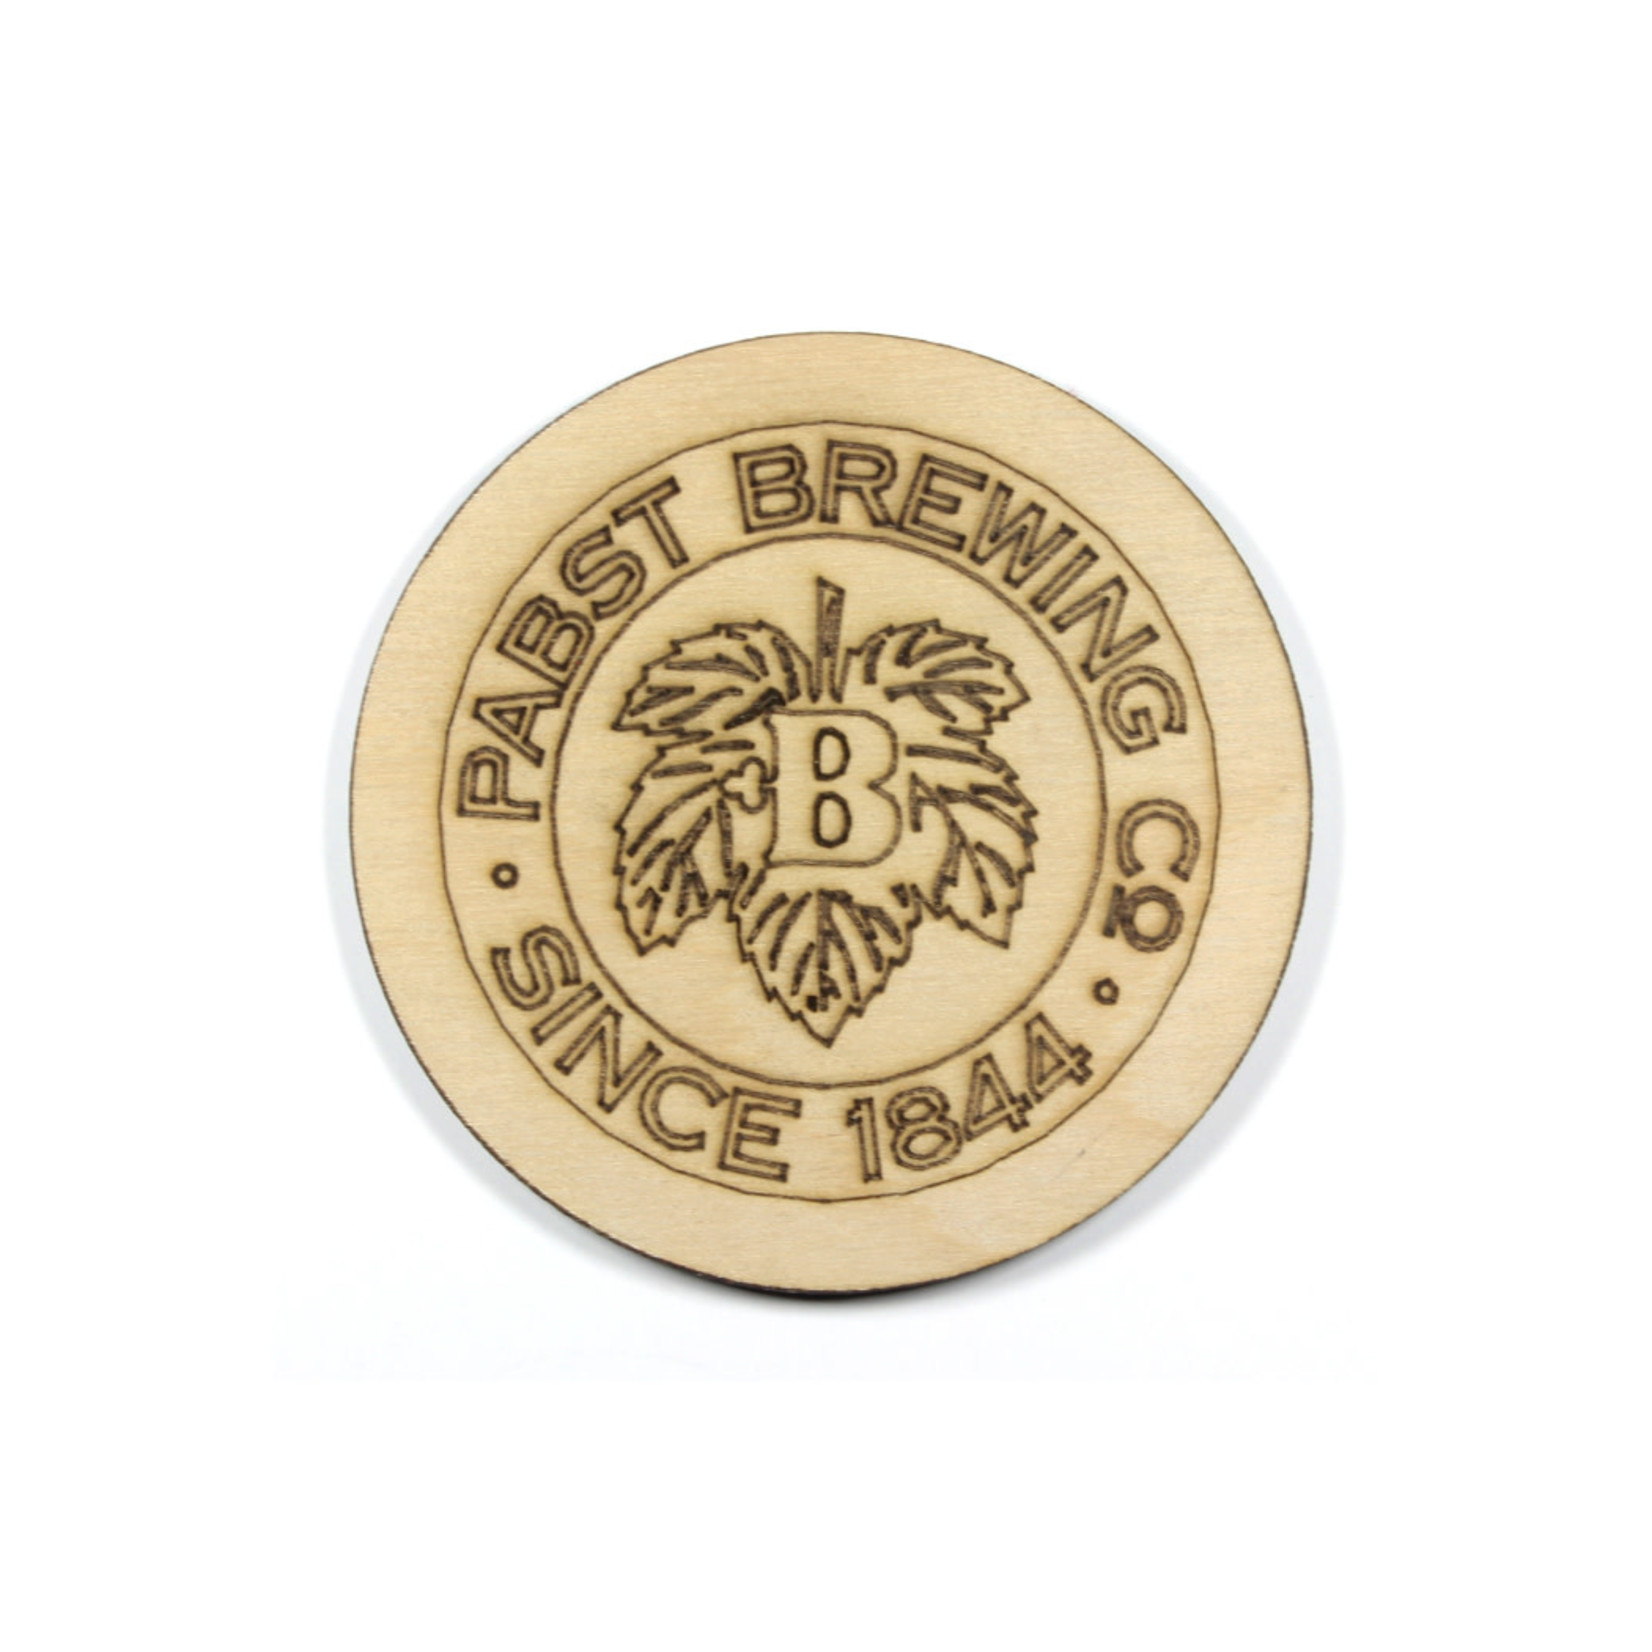 Pabst Pabst Wooden Coaster - Corporate Logo